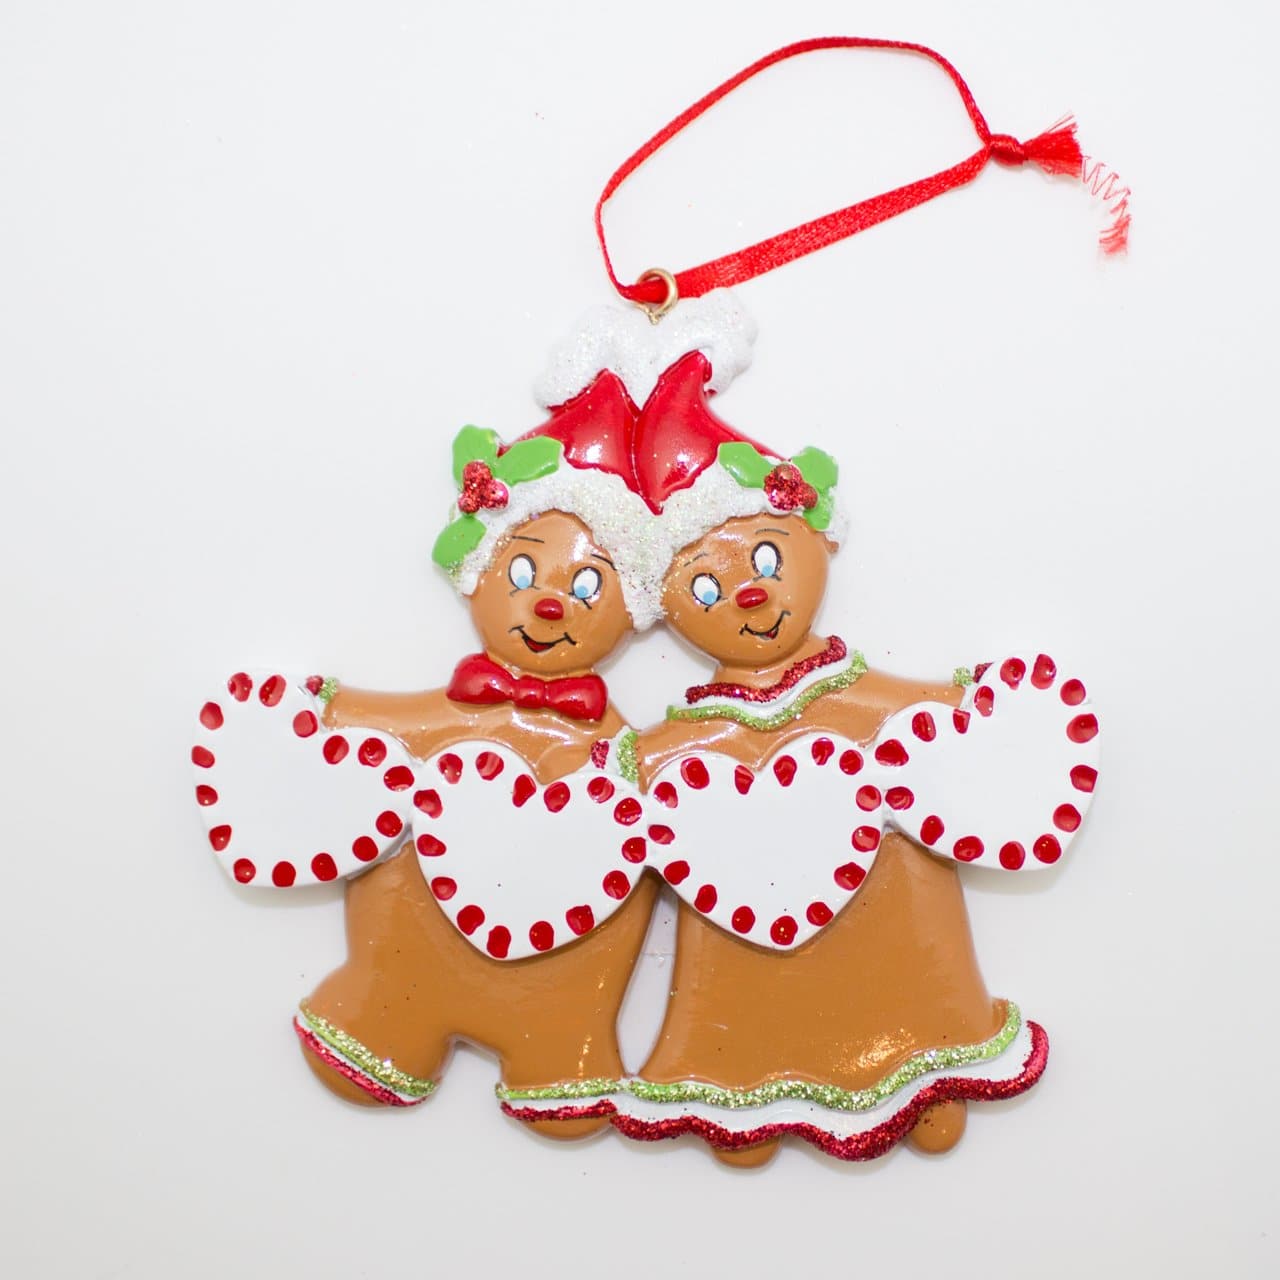 Gingerbread Man Hearts - Christmas Ornament (Suitable for Personalization)